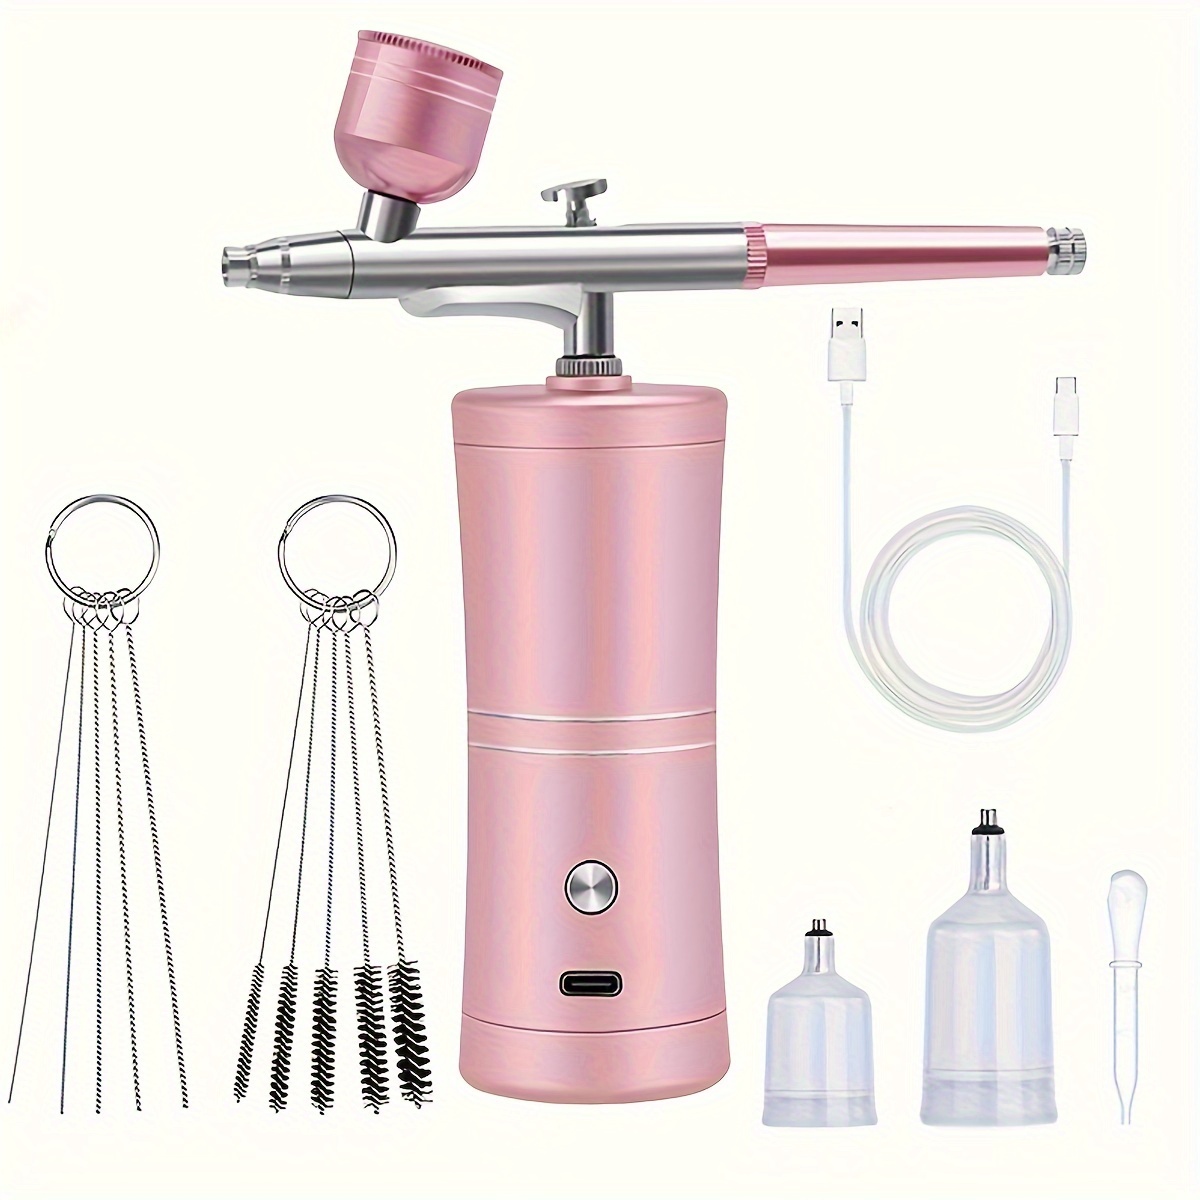 

Usb Rechargeable Mini Airbrush Kit: Portable, Versatile, And Safe Compressor For Crafts, Tattoos, Cake Decorating & More With Cleaning Kit